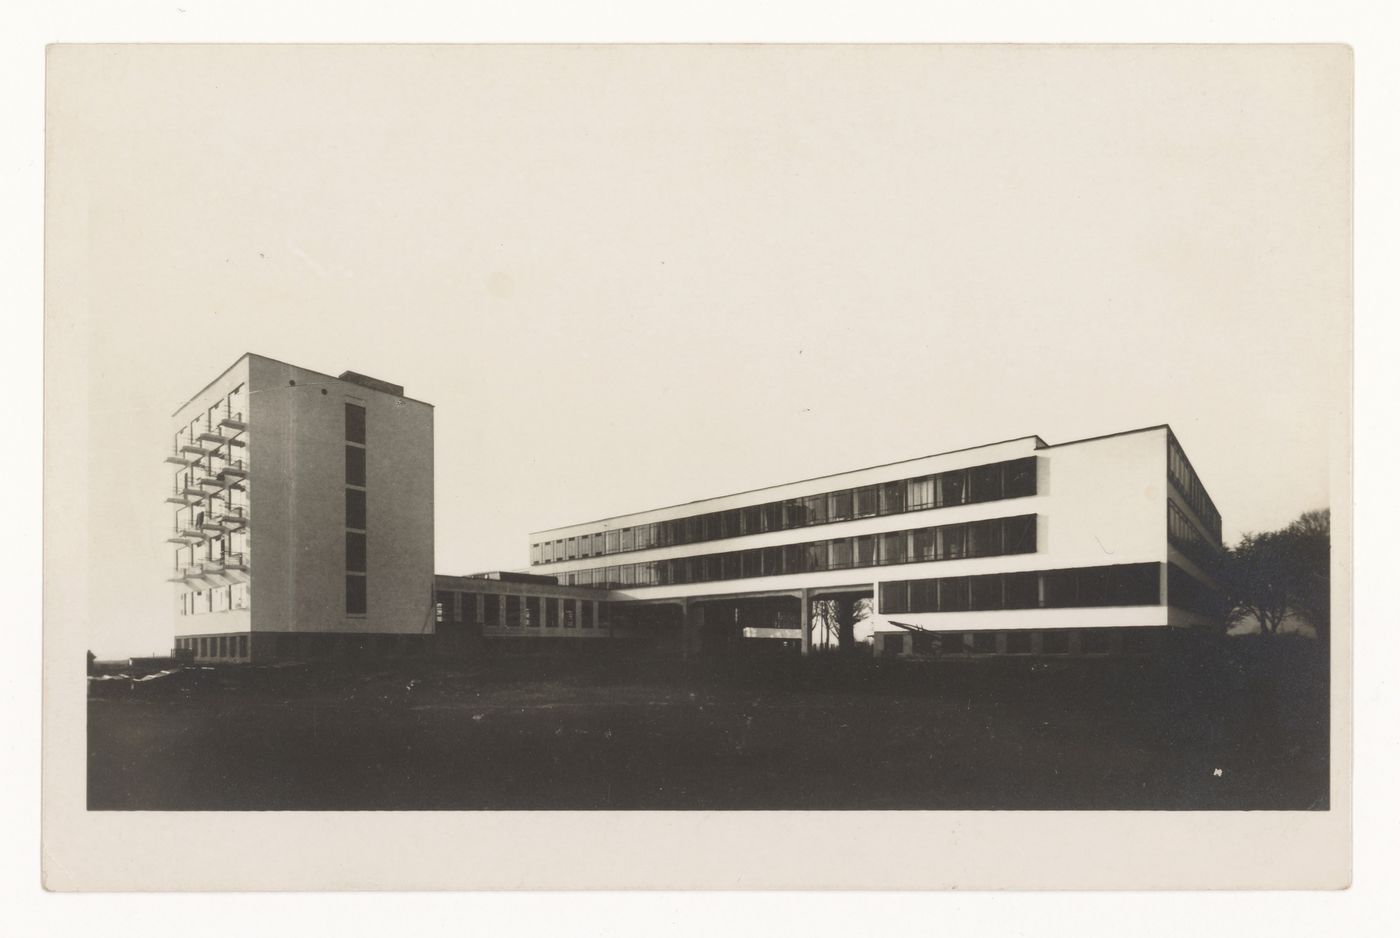 Exterior view of the Bauhaus building showing the studio wing, auditorium, cafeteria, and administration wing, Dessau, Germany